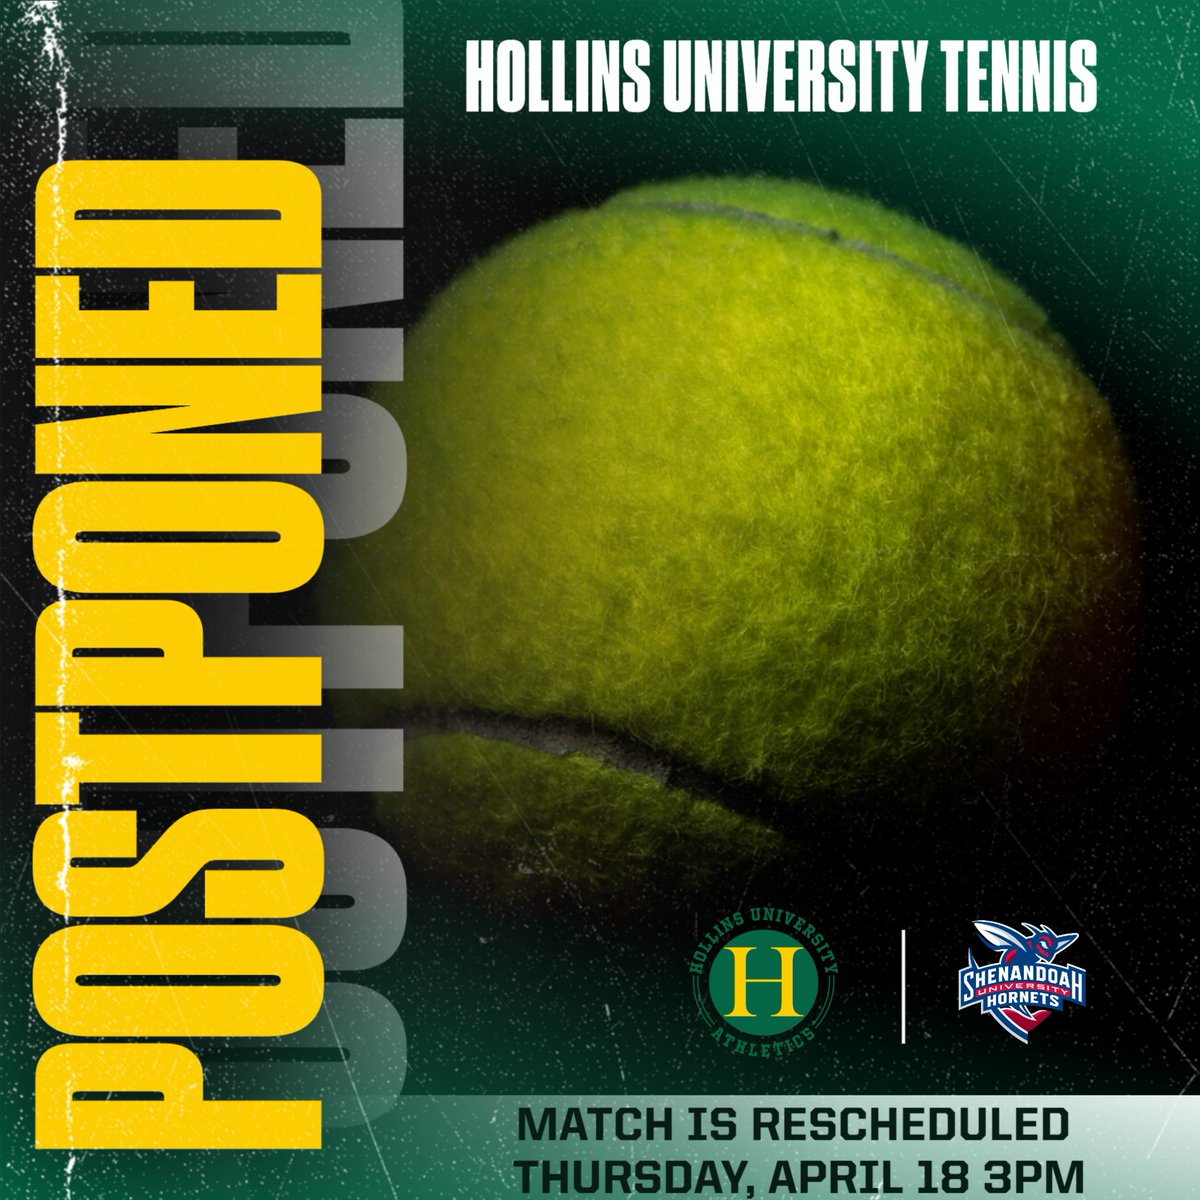 Today's tennis match at Shenandoah has been postponed due to weather. The match is rescheduled for next Thursday, April 18.